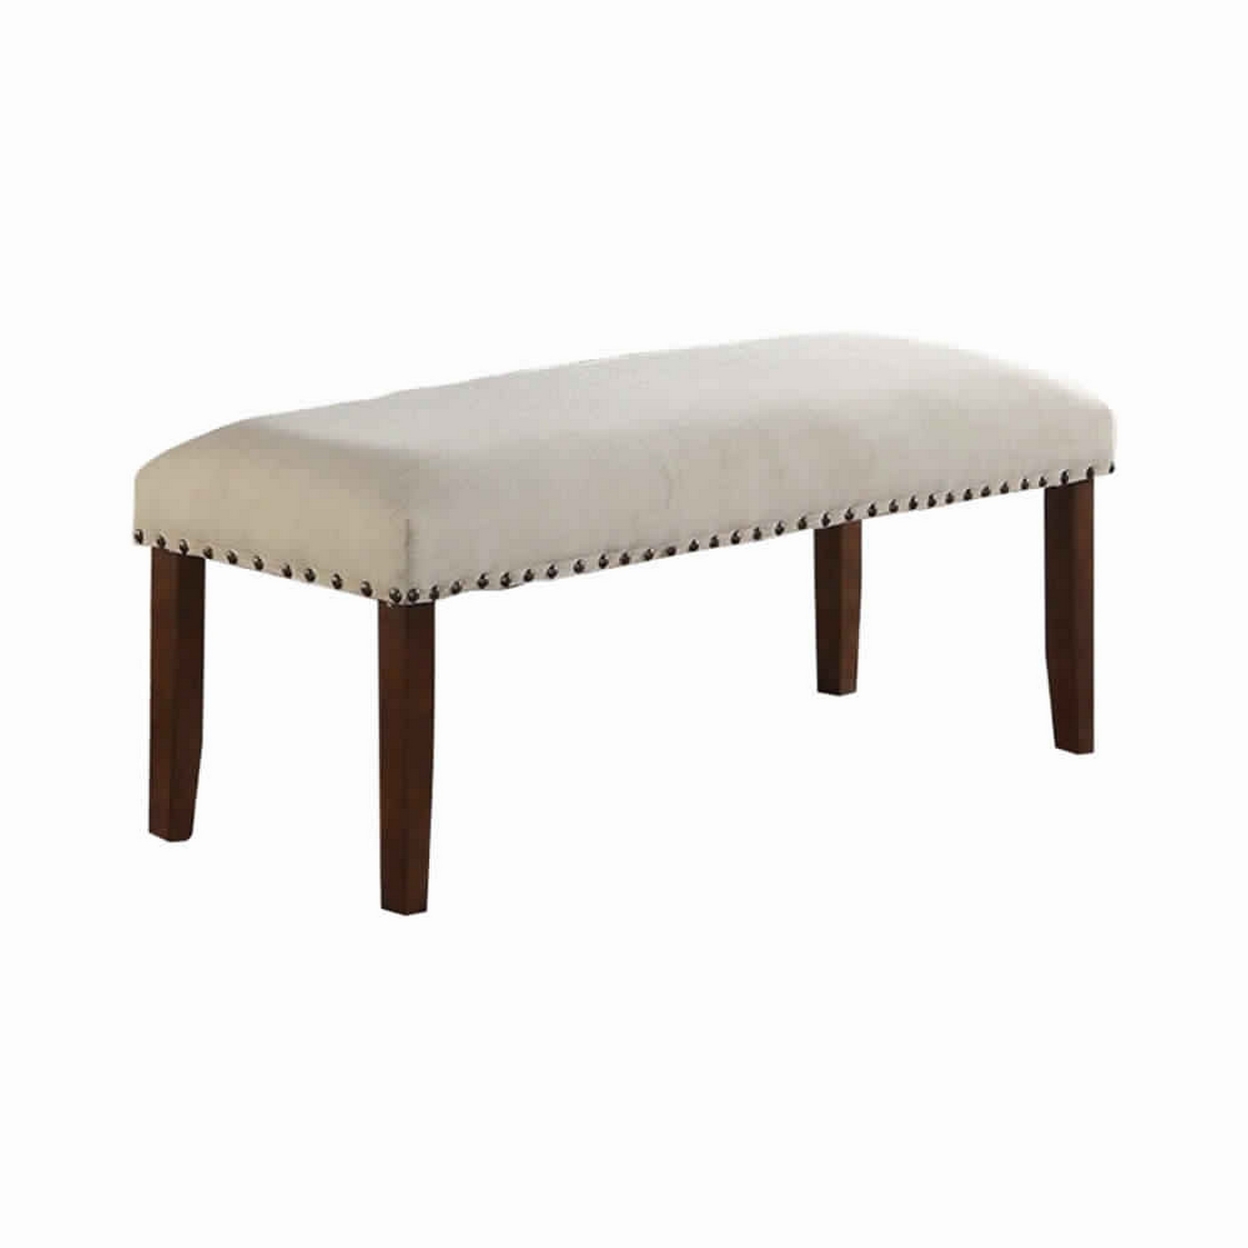 Rubber Wood Bench With Nail Trim Head Design Brown And Cream- Saltoro Sherpi